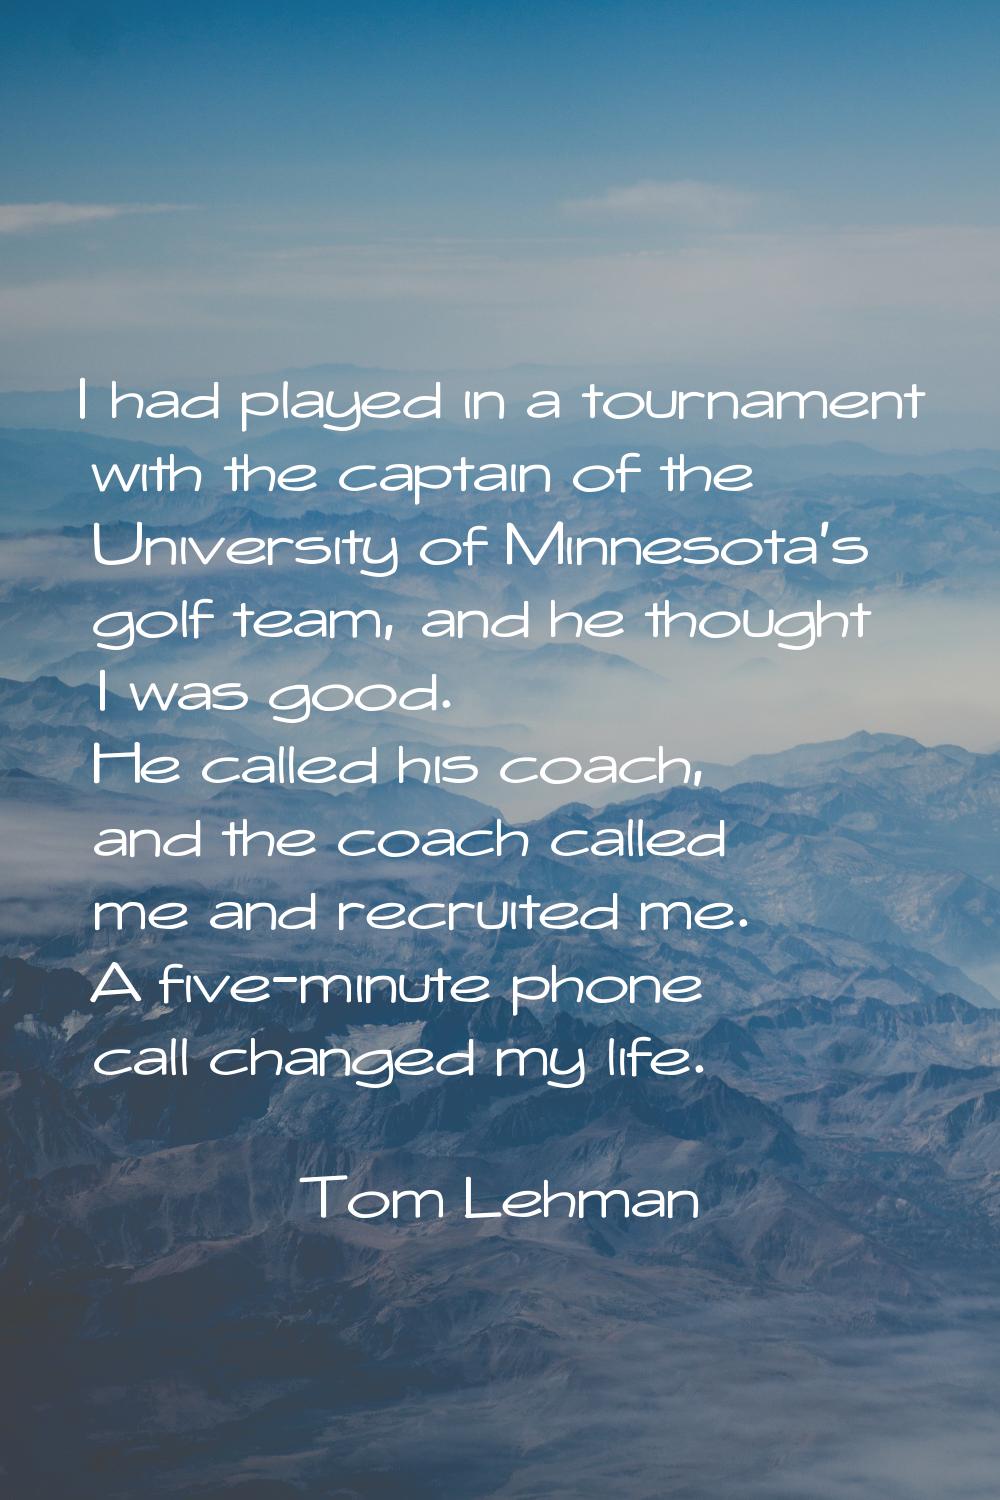 I had played in a tournament with the captain of the University of Minnesota's golf team, and he th